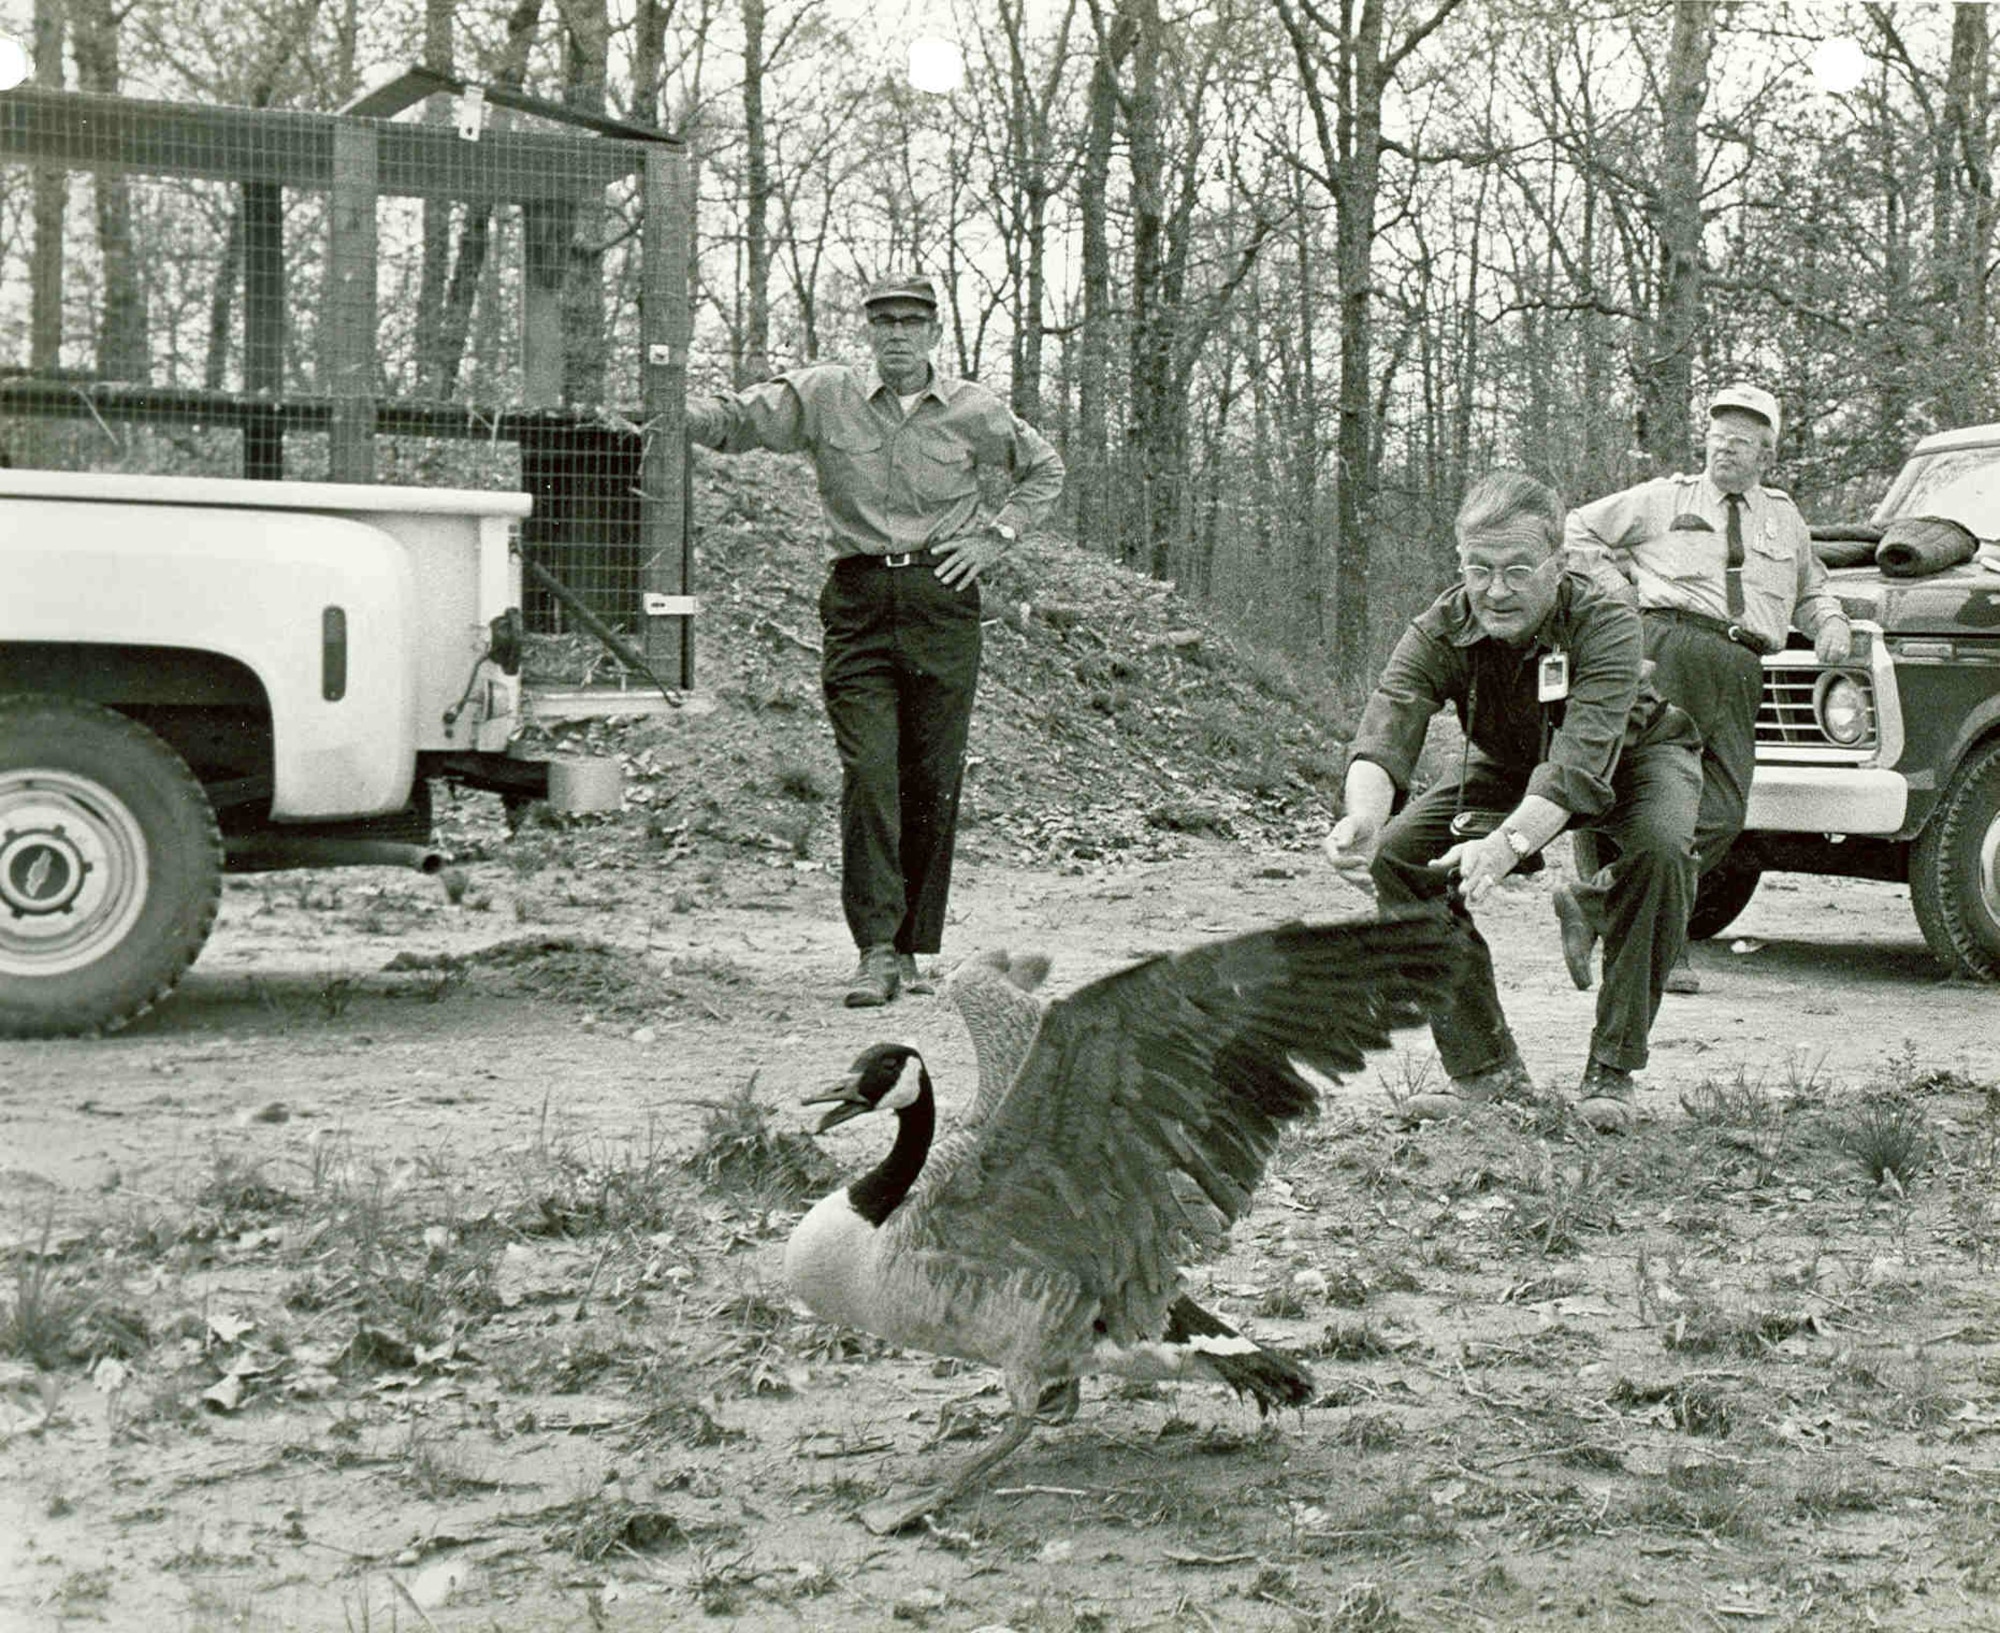 Harry Hitchcock, forester at Arnold Air Force Base, right, releases a goose on Arnold property during a goose release that occurred in 1974. Twenty-five pair of Giant Canada Geese were released near the Arnold cooling water retention pond in an effort to establish a resident population of the waterfowl in the area. Also pictured is Cecil Davis of the Wheeler National Wildlife Refuge in Decatur, Ga. This image and an accompanying article about the release were published in the May 1974 issue of High Mach. (U.S. Air Force photo)